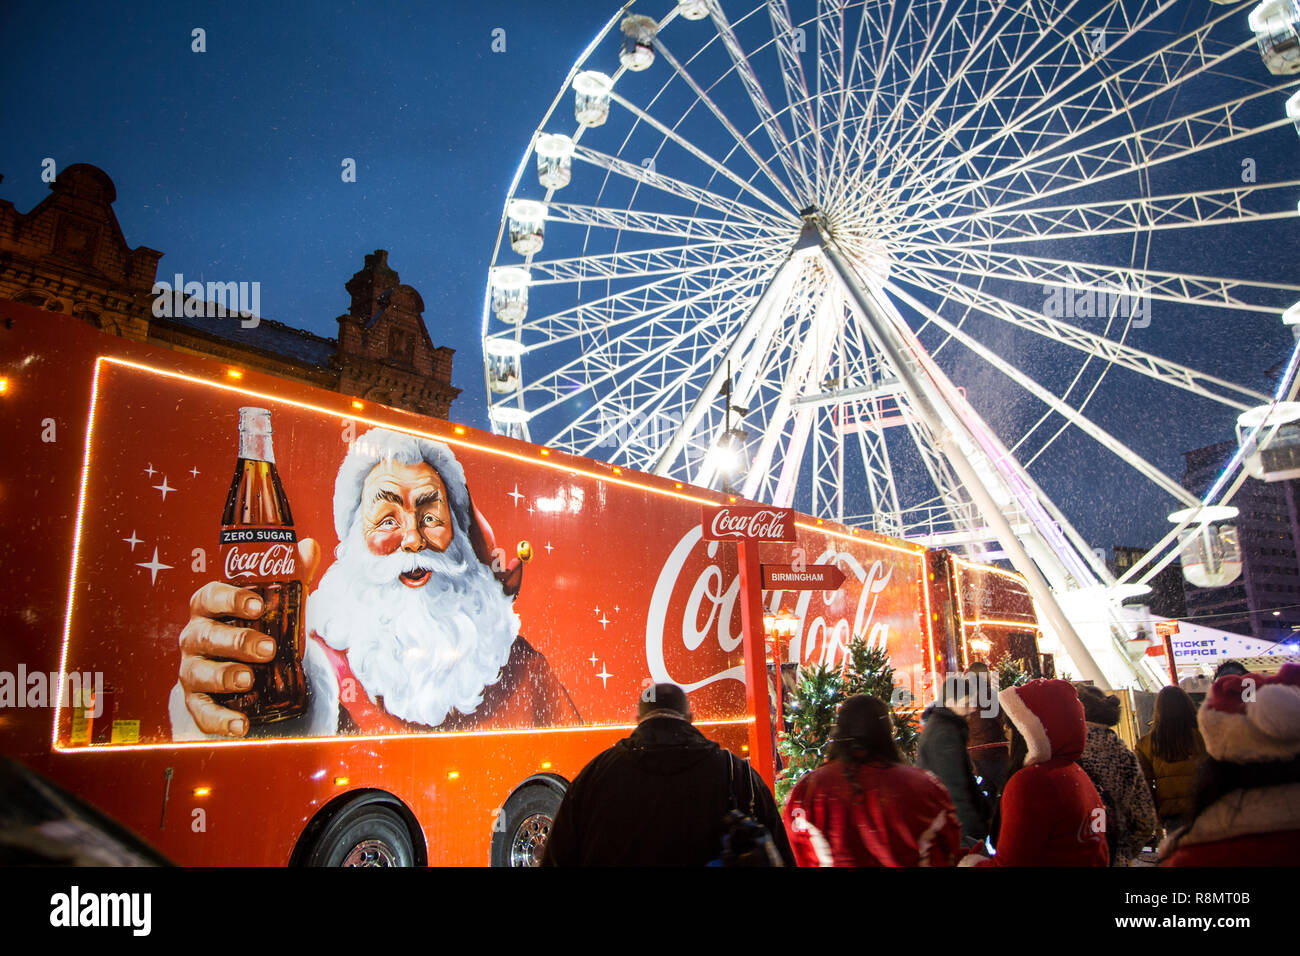 Birmingham, UK. 16th Dec 2018. Coca Cola truck comes to Birmingham at Eastside Park on the last day of it's six week tour of the UK Credit: steven roe/Alamy Live News Stock Photo